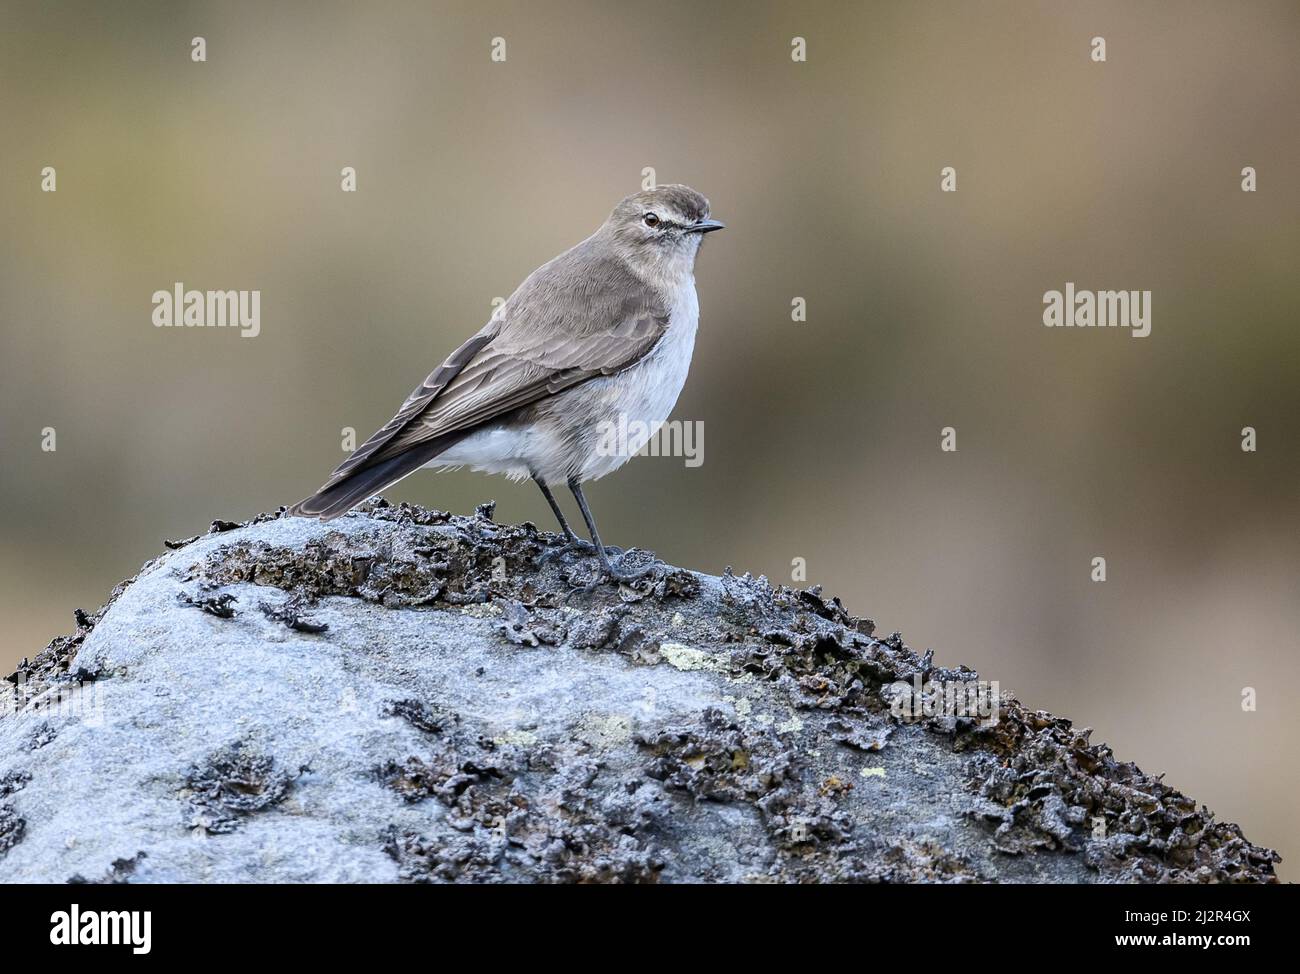 A Plain-capped Ground-Tyrant (Muscisaxicola alpinus) standing on a rock. Colombia, South America. Stock Photo